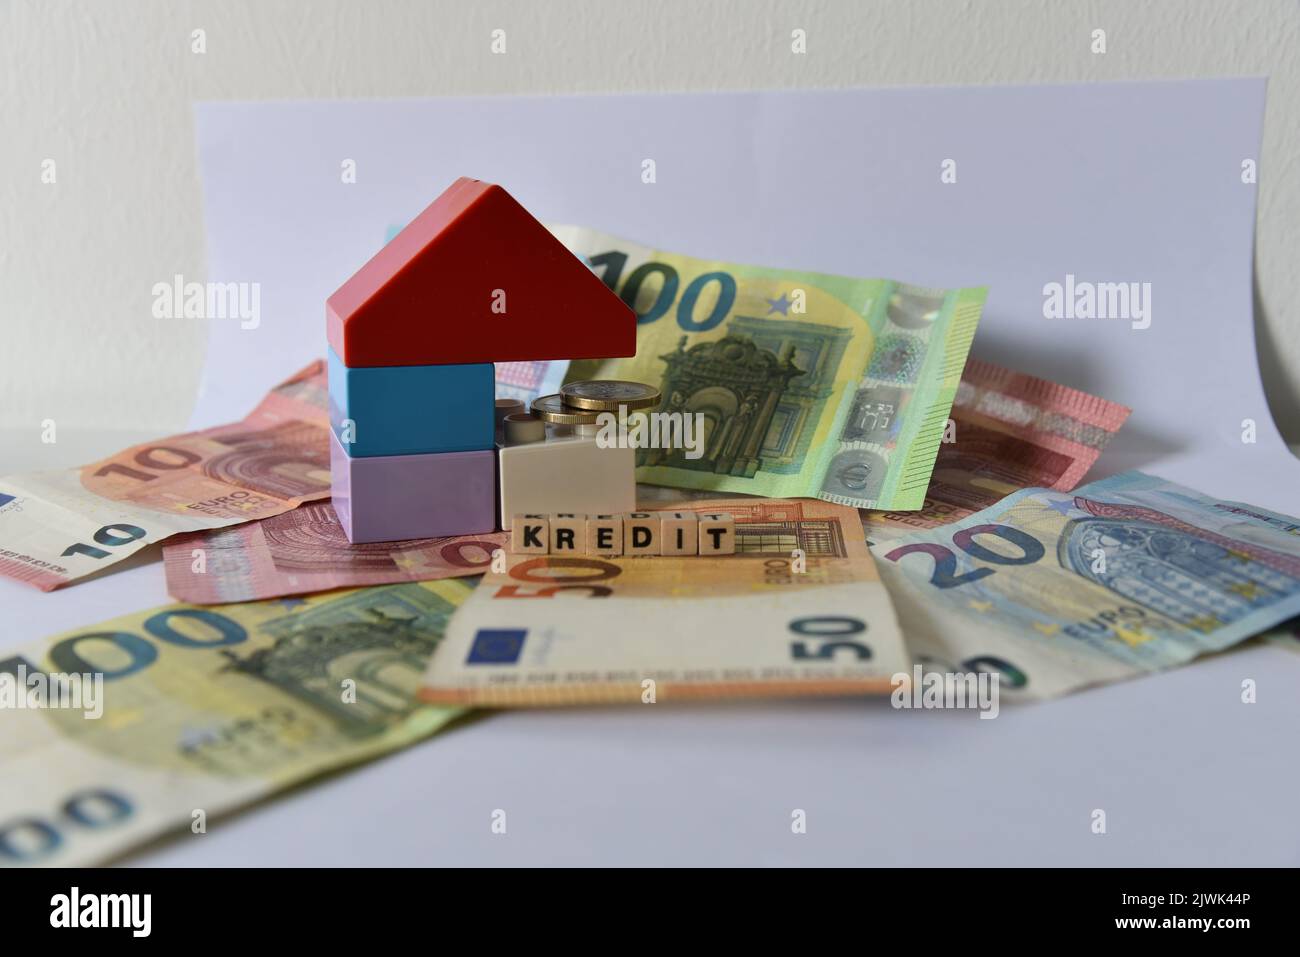 euro bank notes a small house and the word kredit Stock Photo